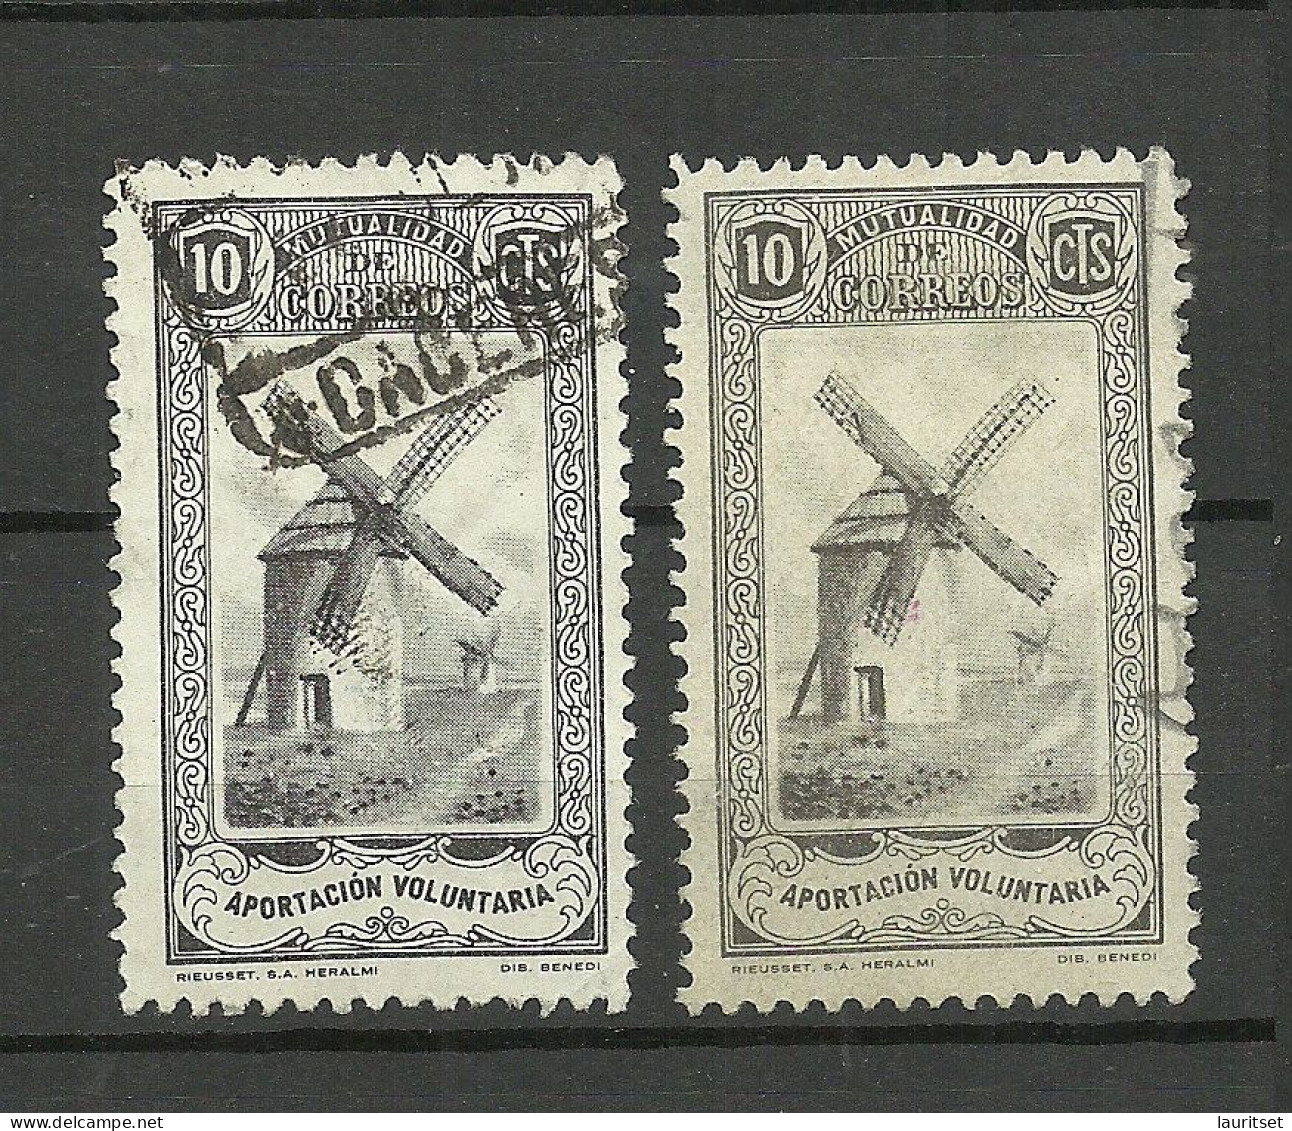 SPAIN Spanien Espana 1930ies Civil War Local Carity Wohlfahrt Wind Mill Windmühle - Color Chades, 2 Stamps, O - Windmills